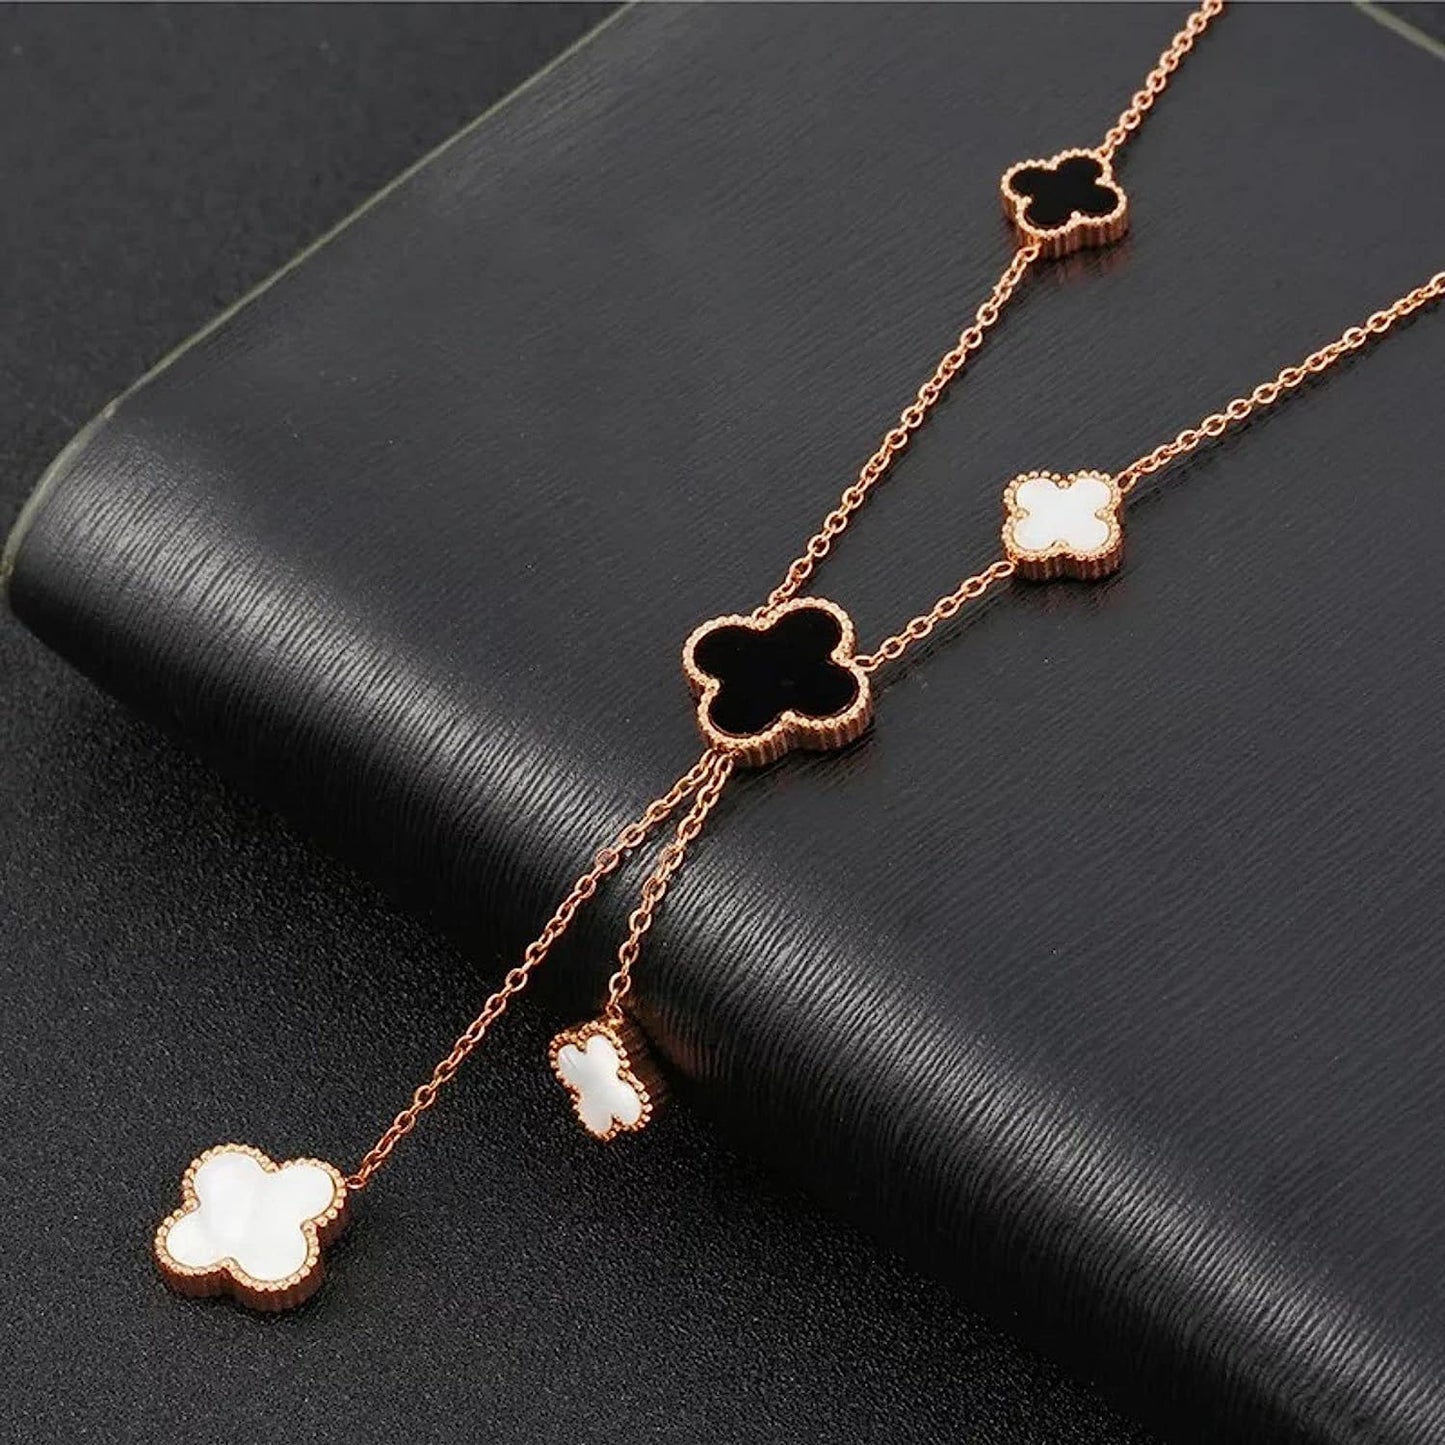 Lucky Clover 5 Motifs Double Sided Clover Pendant Necklace - Gold Four Leaf Clover Necklace - Mother'S Day Gift, Gold Plated Stainless Steel